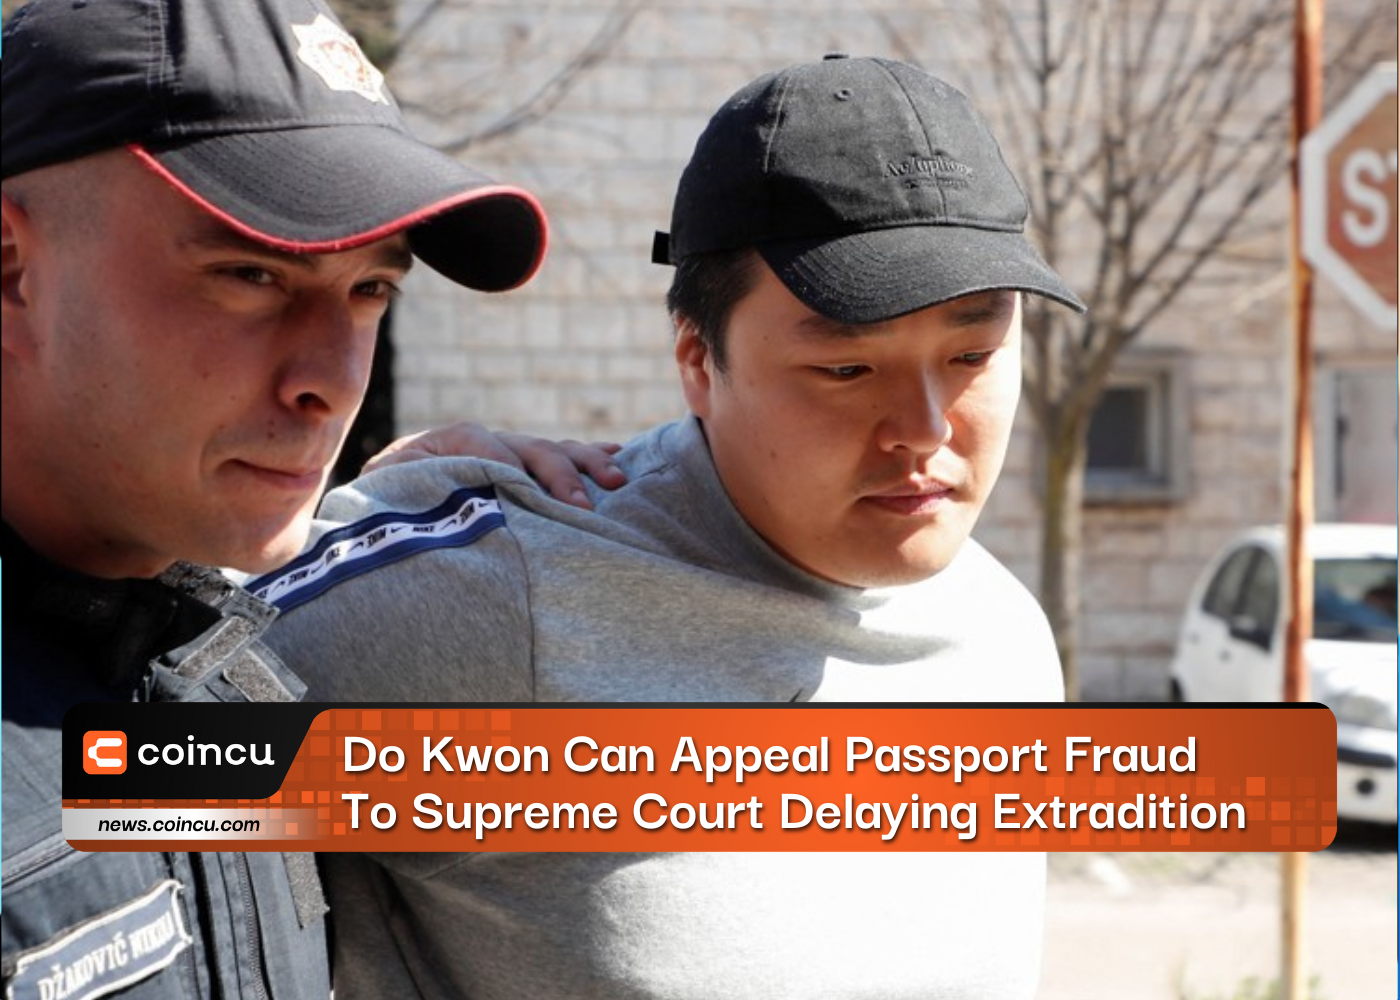 Do Kwon Can Appeal Passport Fraud Case To Supreme Court Delaying Extradition